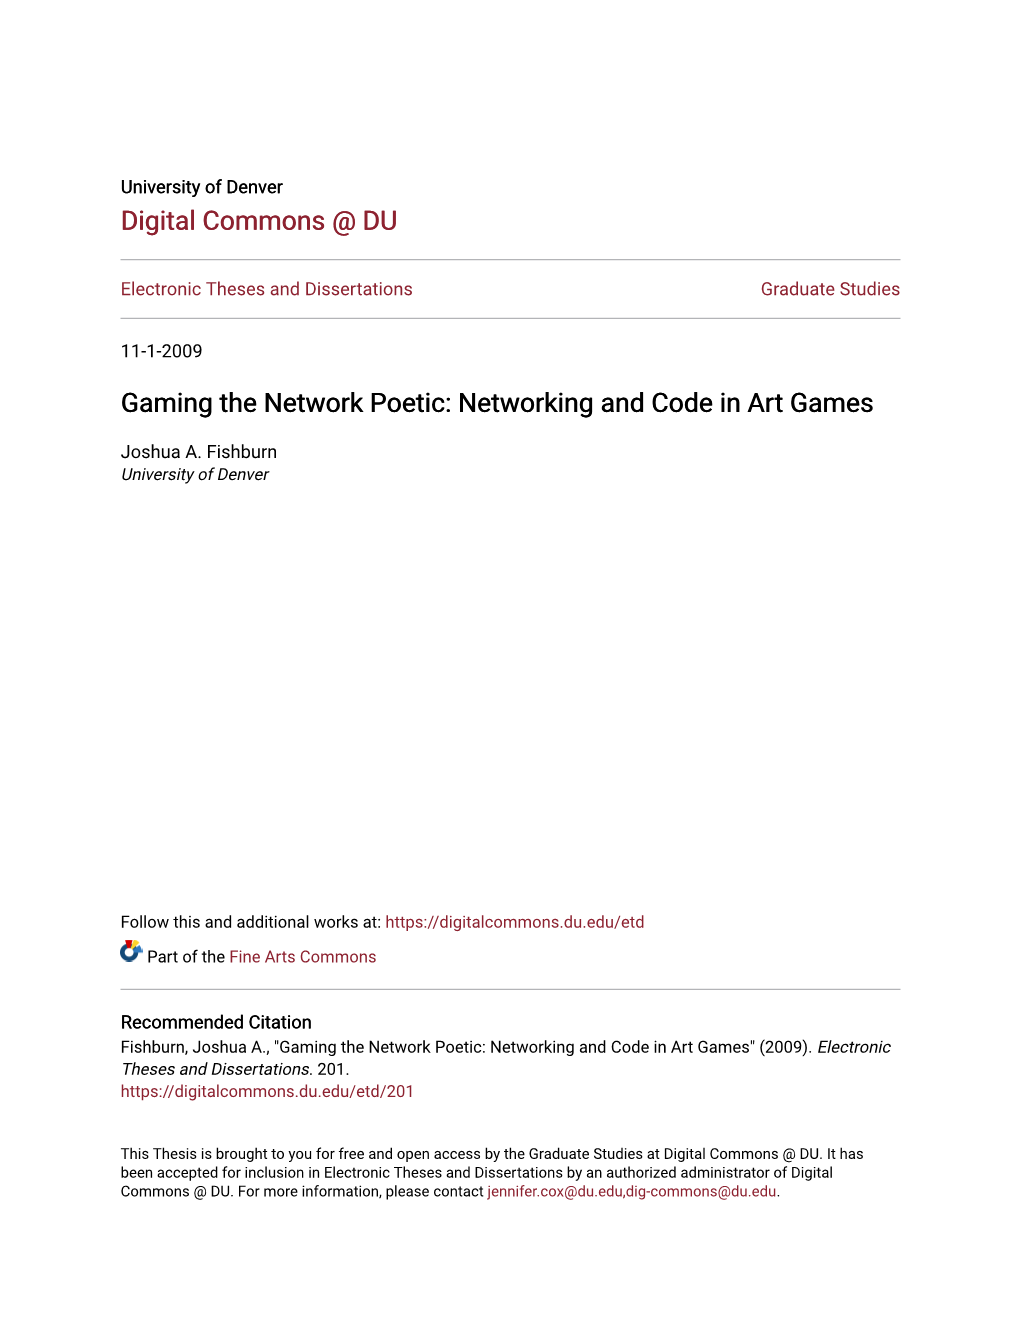 Gaming the Network Poetic: Networking and Code in Art Games